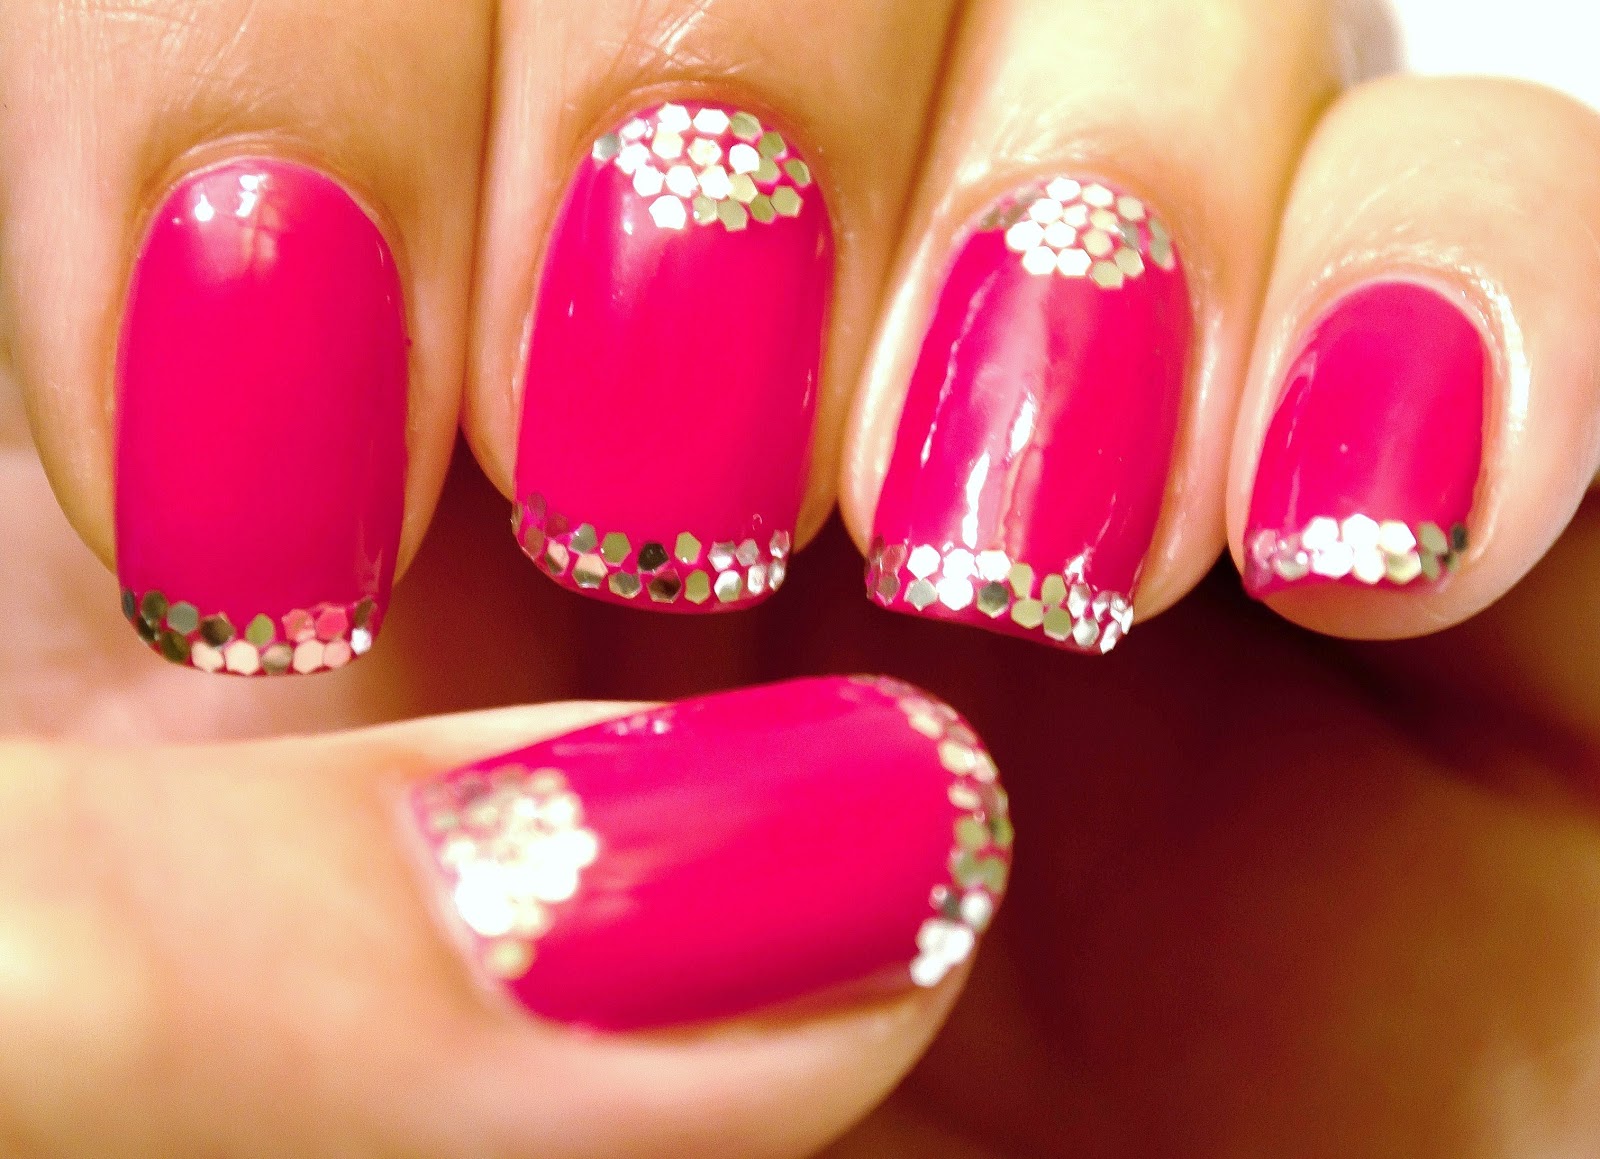 Pink Nails With Glitter